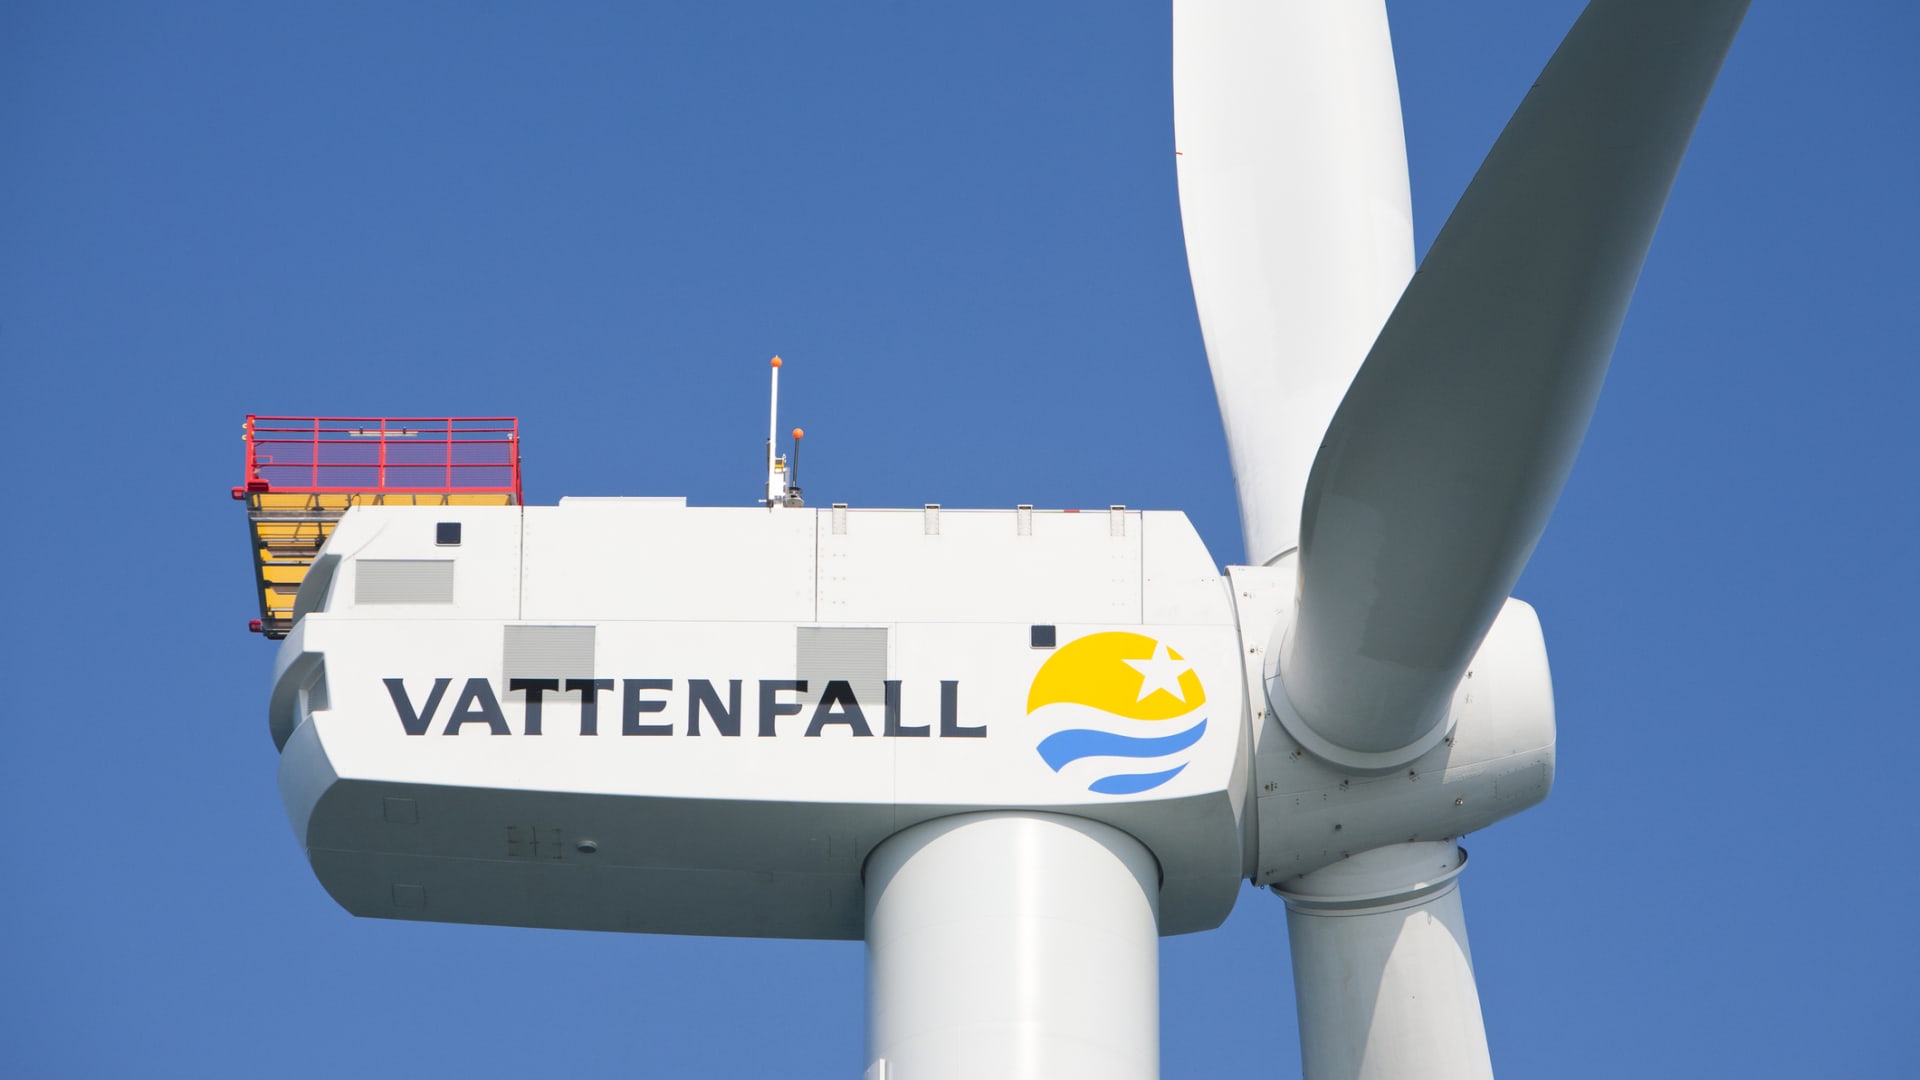 Massive offshore wind farm to make use of recyclable turbine blades